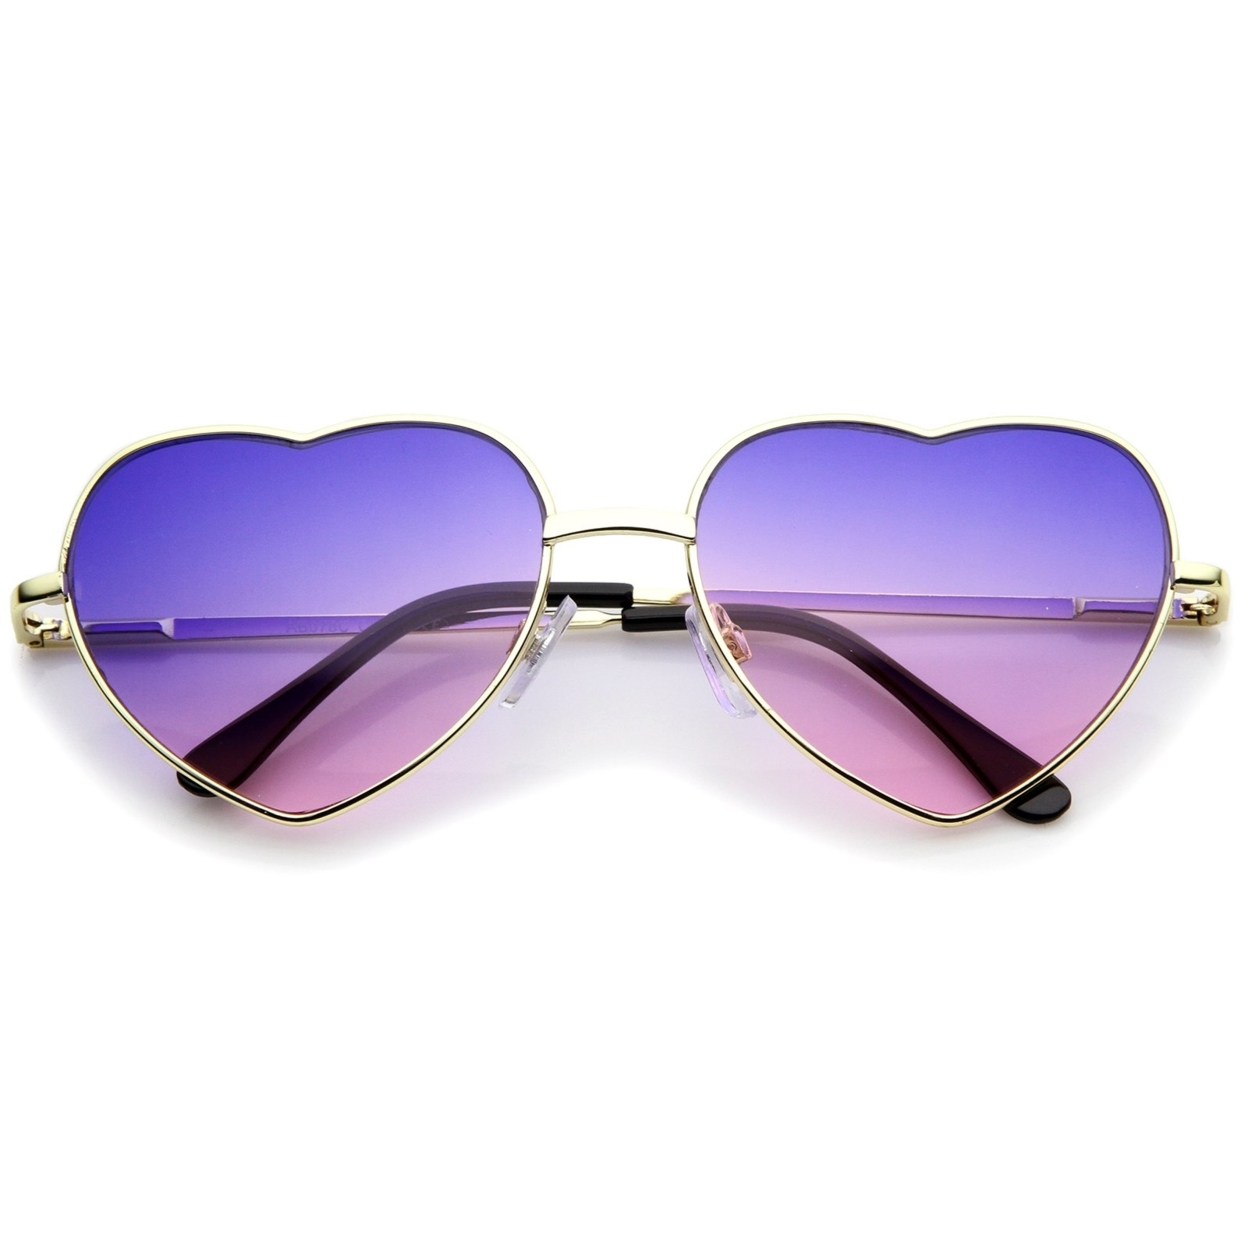 Small Thin Metal Frame Temples Vibrant Colored Gradient Lens Heart Sunglasses 52mm - Gold / Pink-Yellow